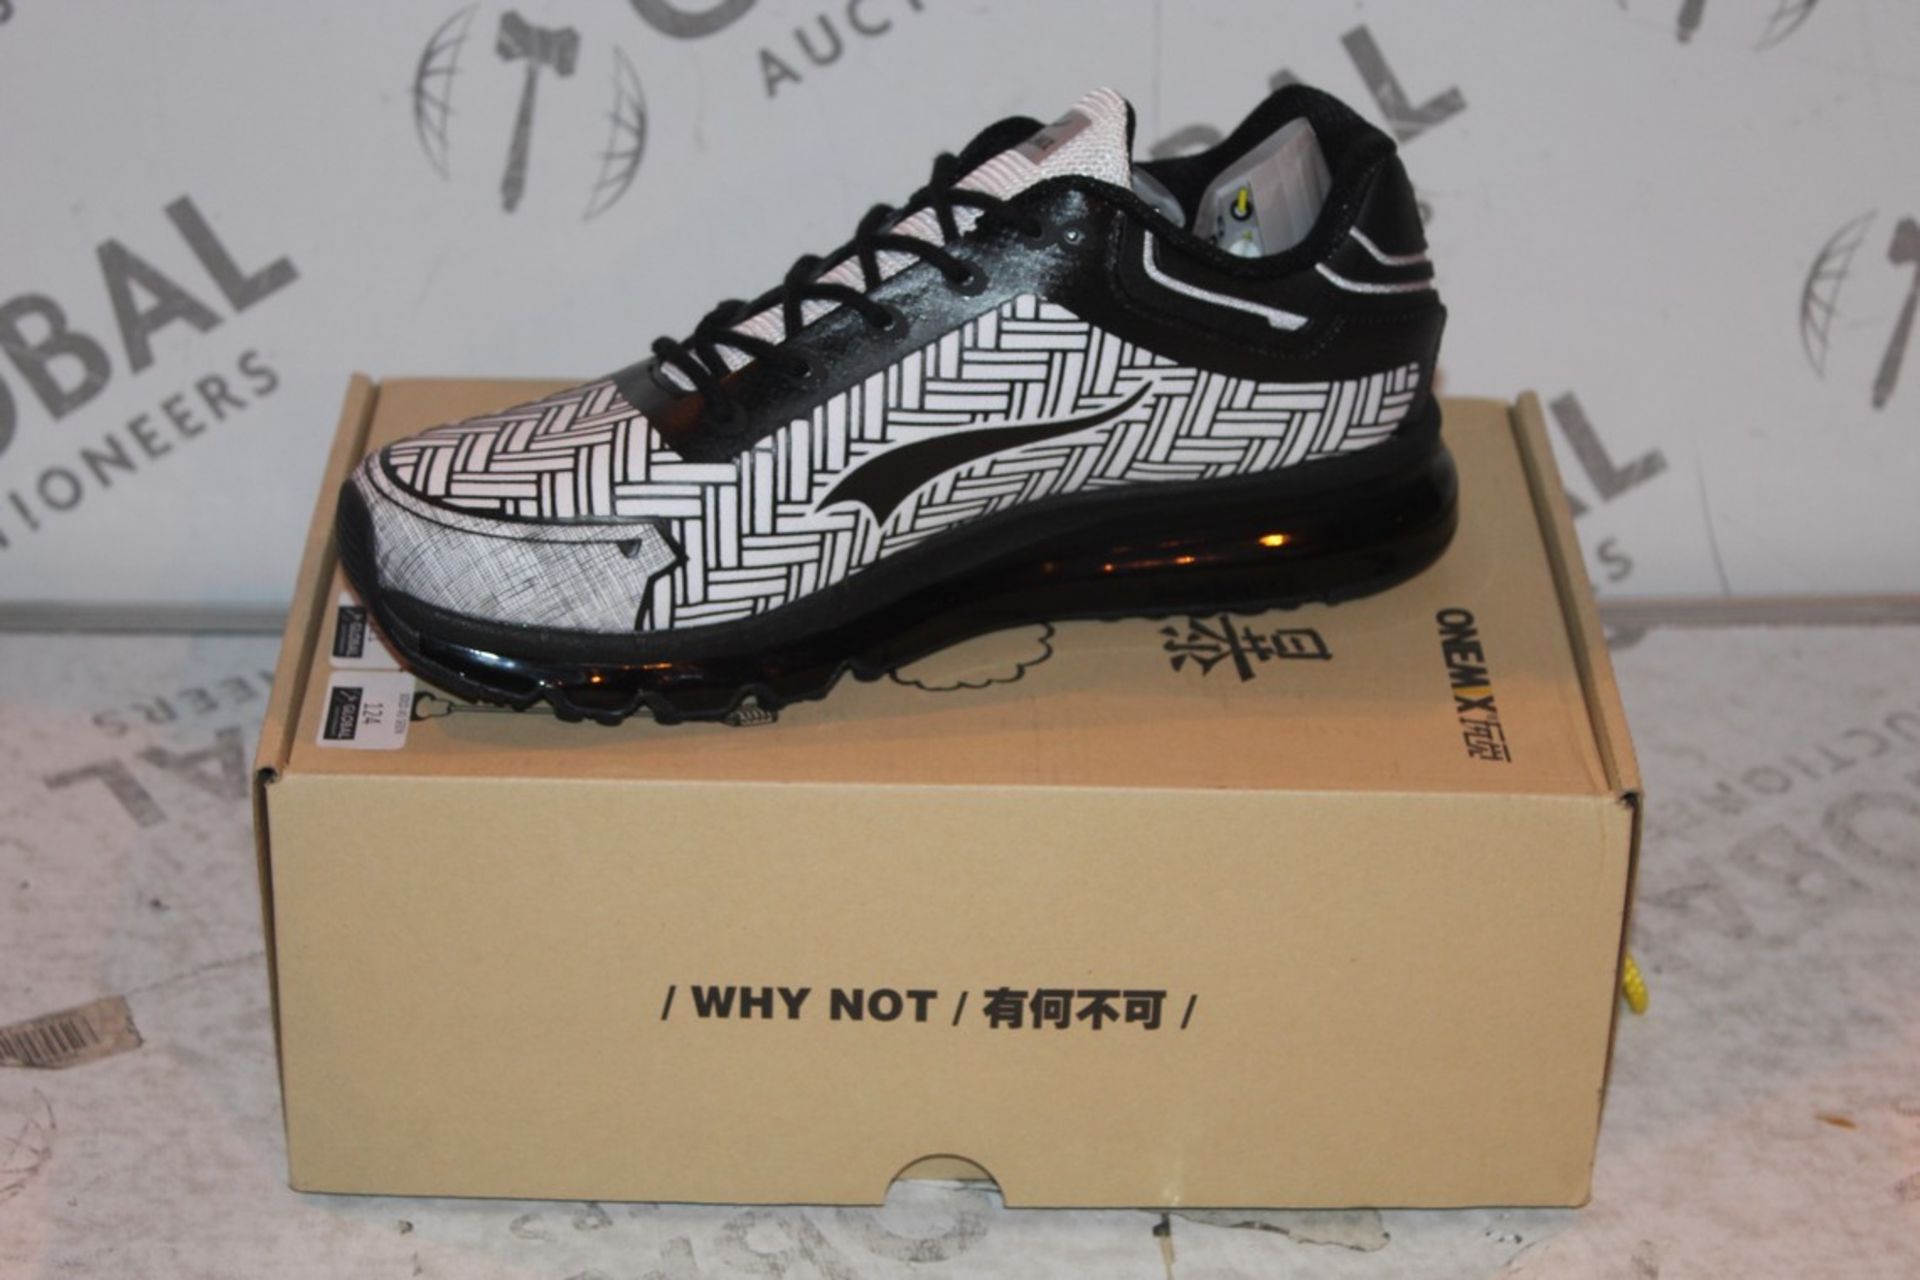 Boxed Brand New Pair of One Mix Size US9.5 Black and White Running Shoes RRP £44.99